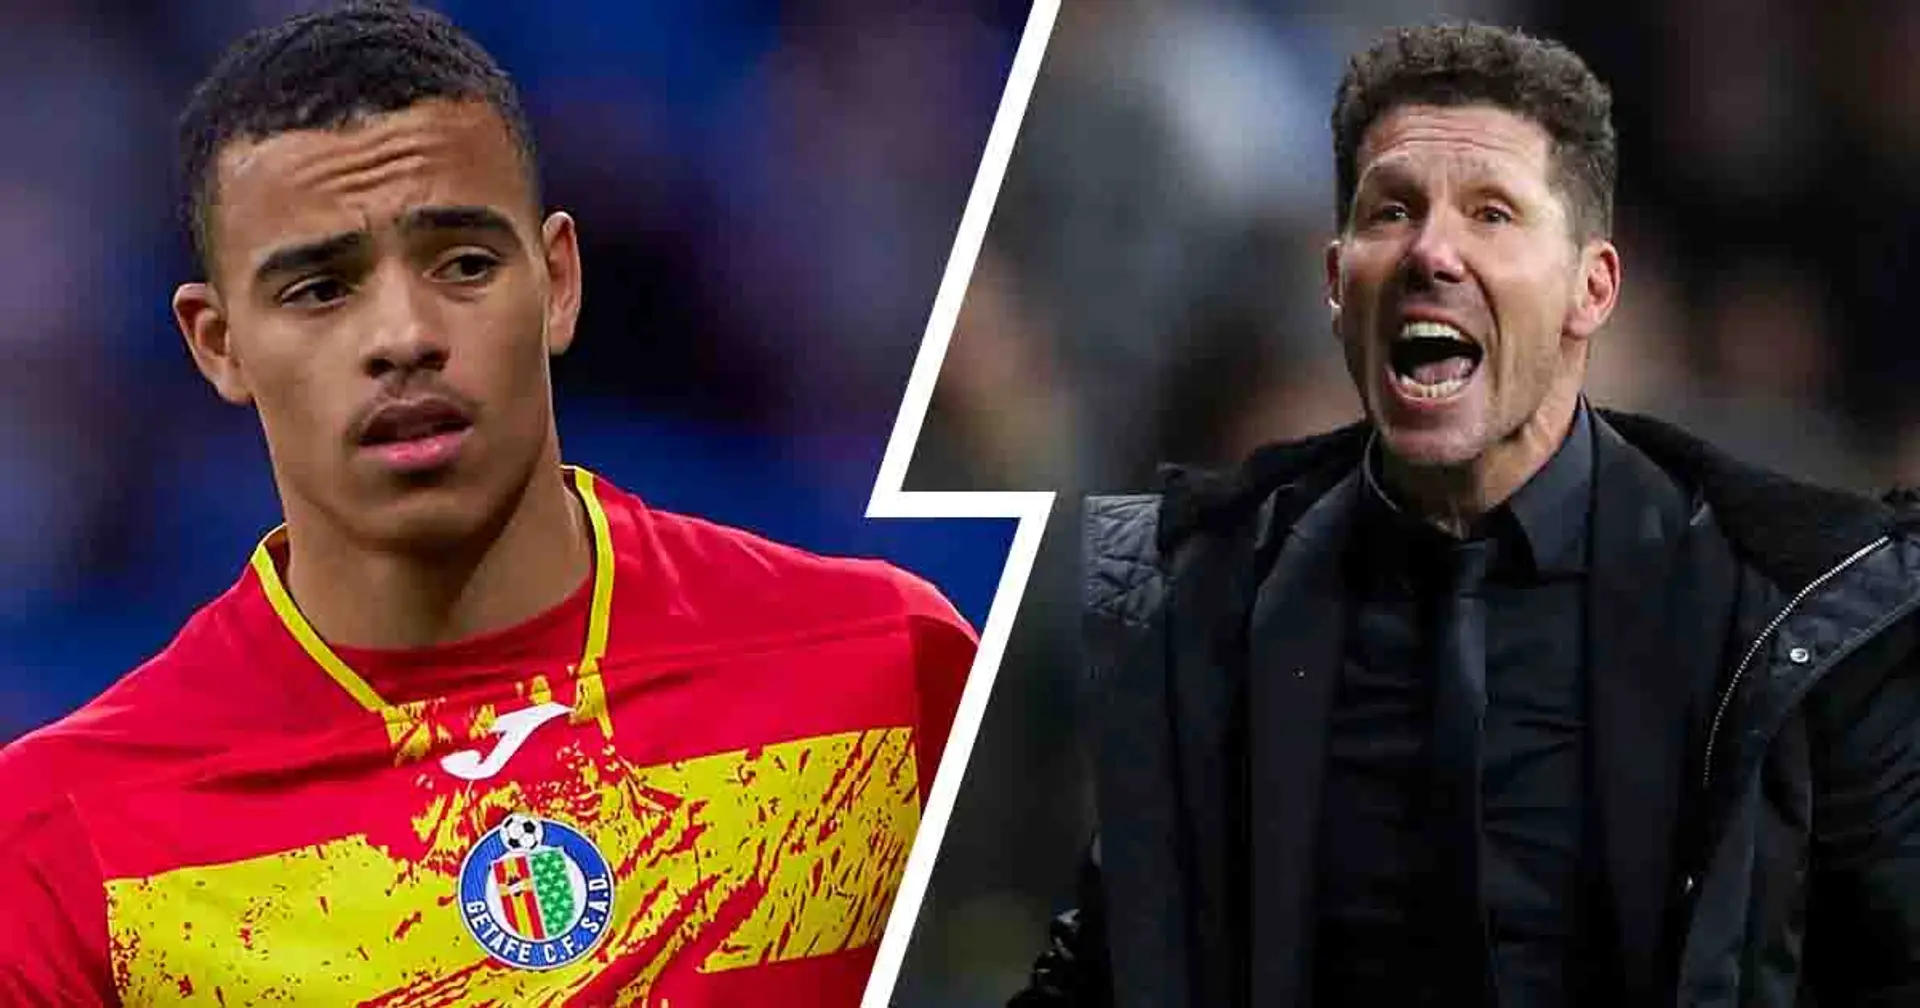 Man United's transfer demands for Greenwood sale labeled as 'outrageous' by Atletico Madrid (reliability: 4 stars)